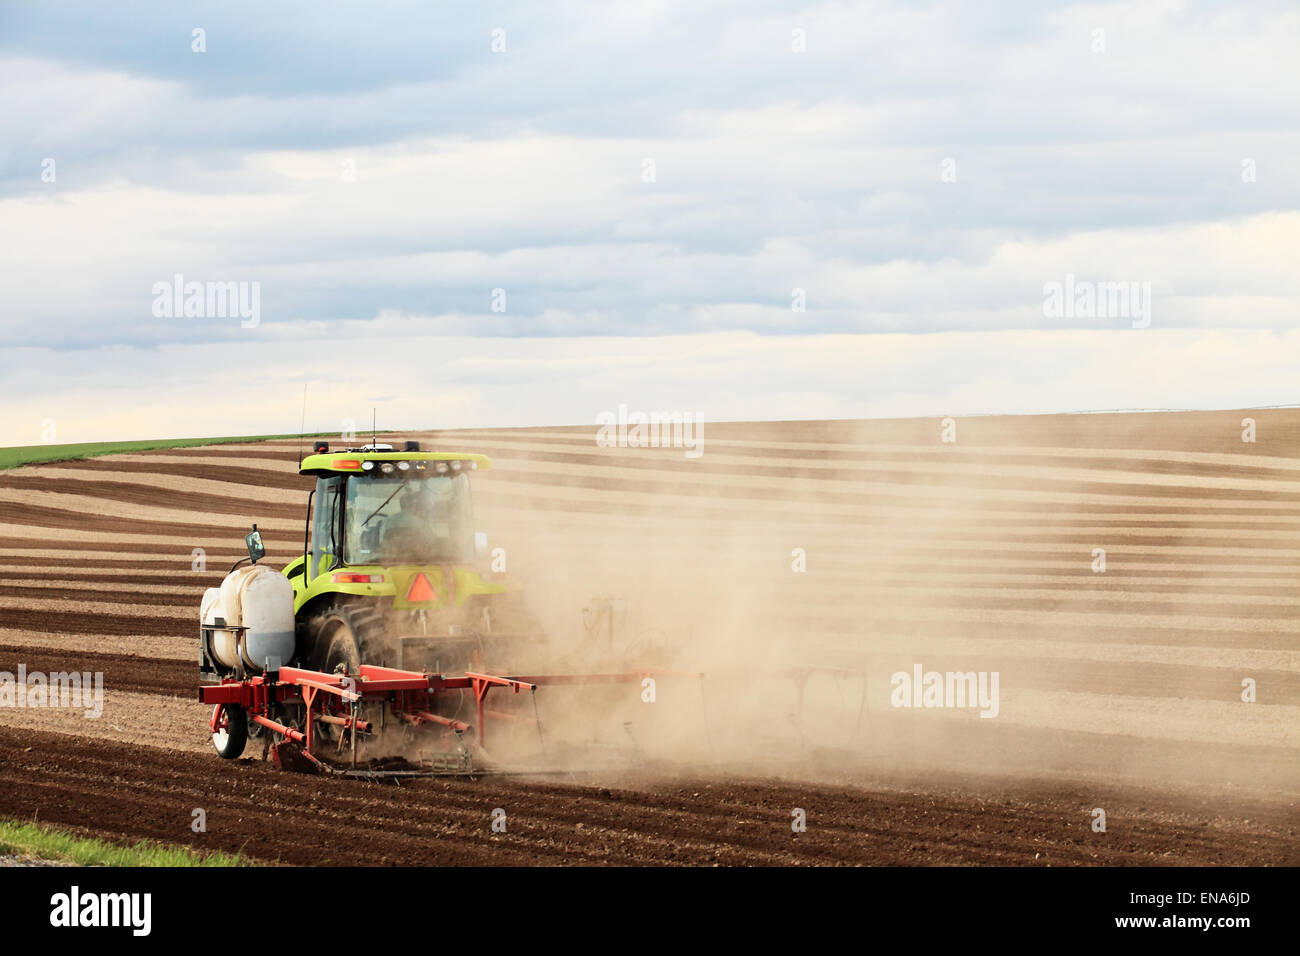 Image of a tractor plowing a field Stock Photo